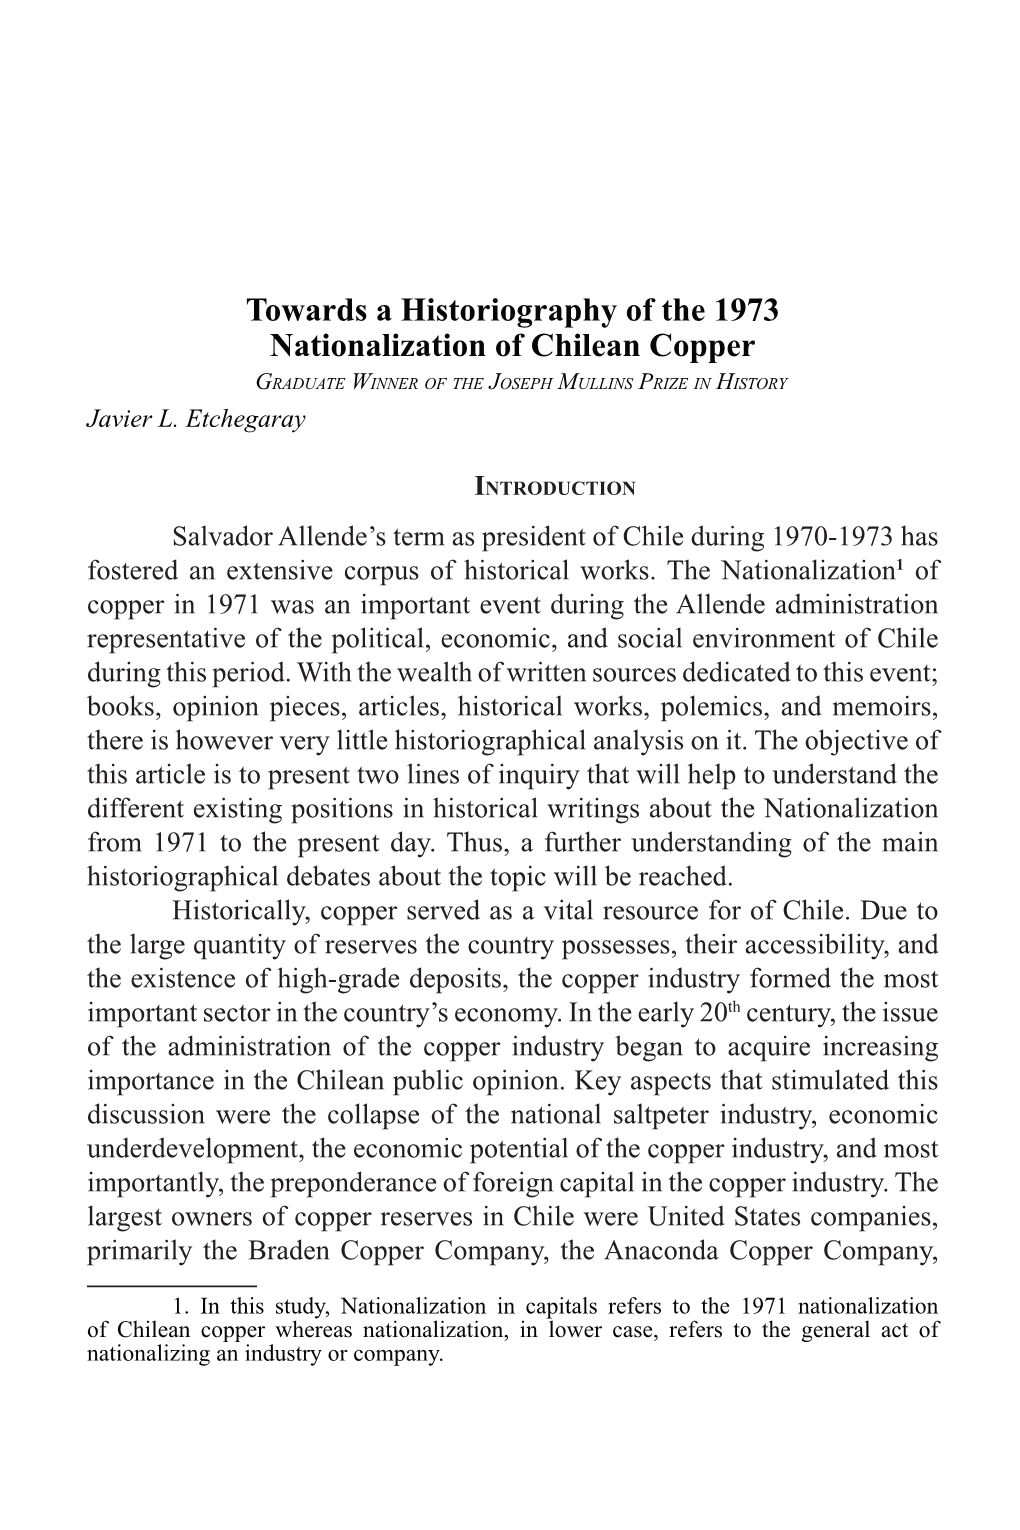 Towards a Historiography of the 1973 Nationalization of Chilean Copper Graduate Winner of the Joseph Mullins Prize in History Javier L